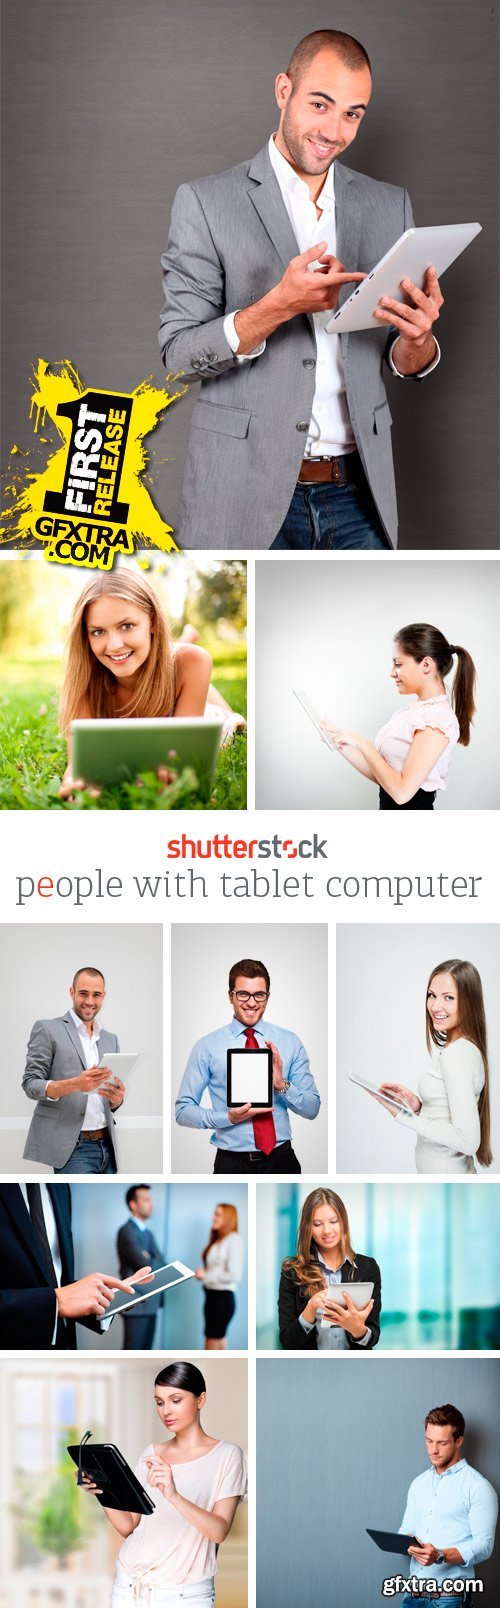 People with Tablet Computer 25xJPG